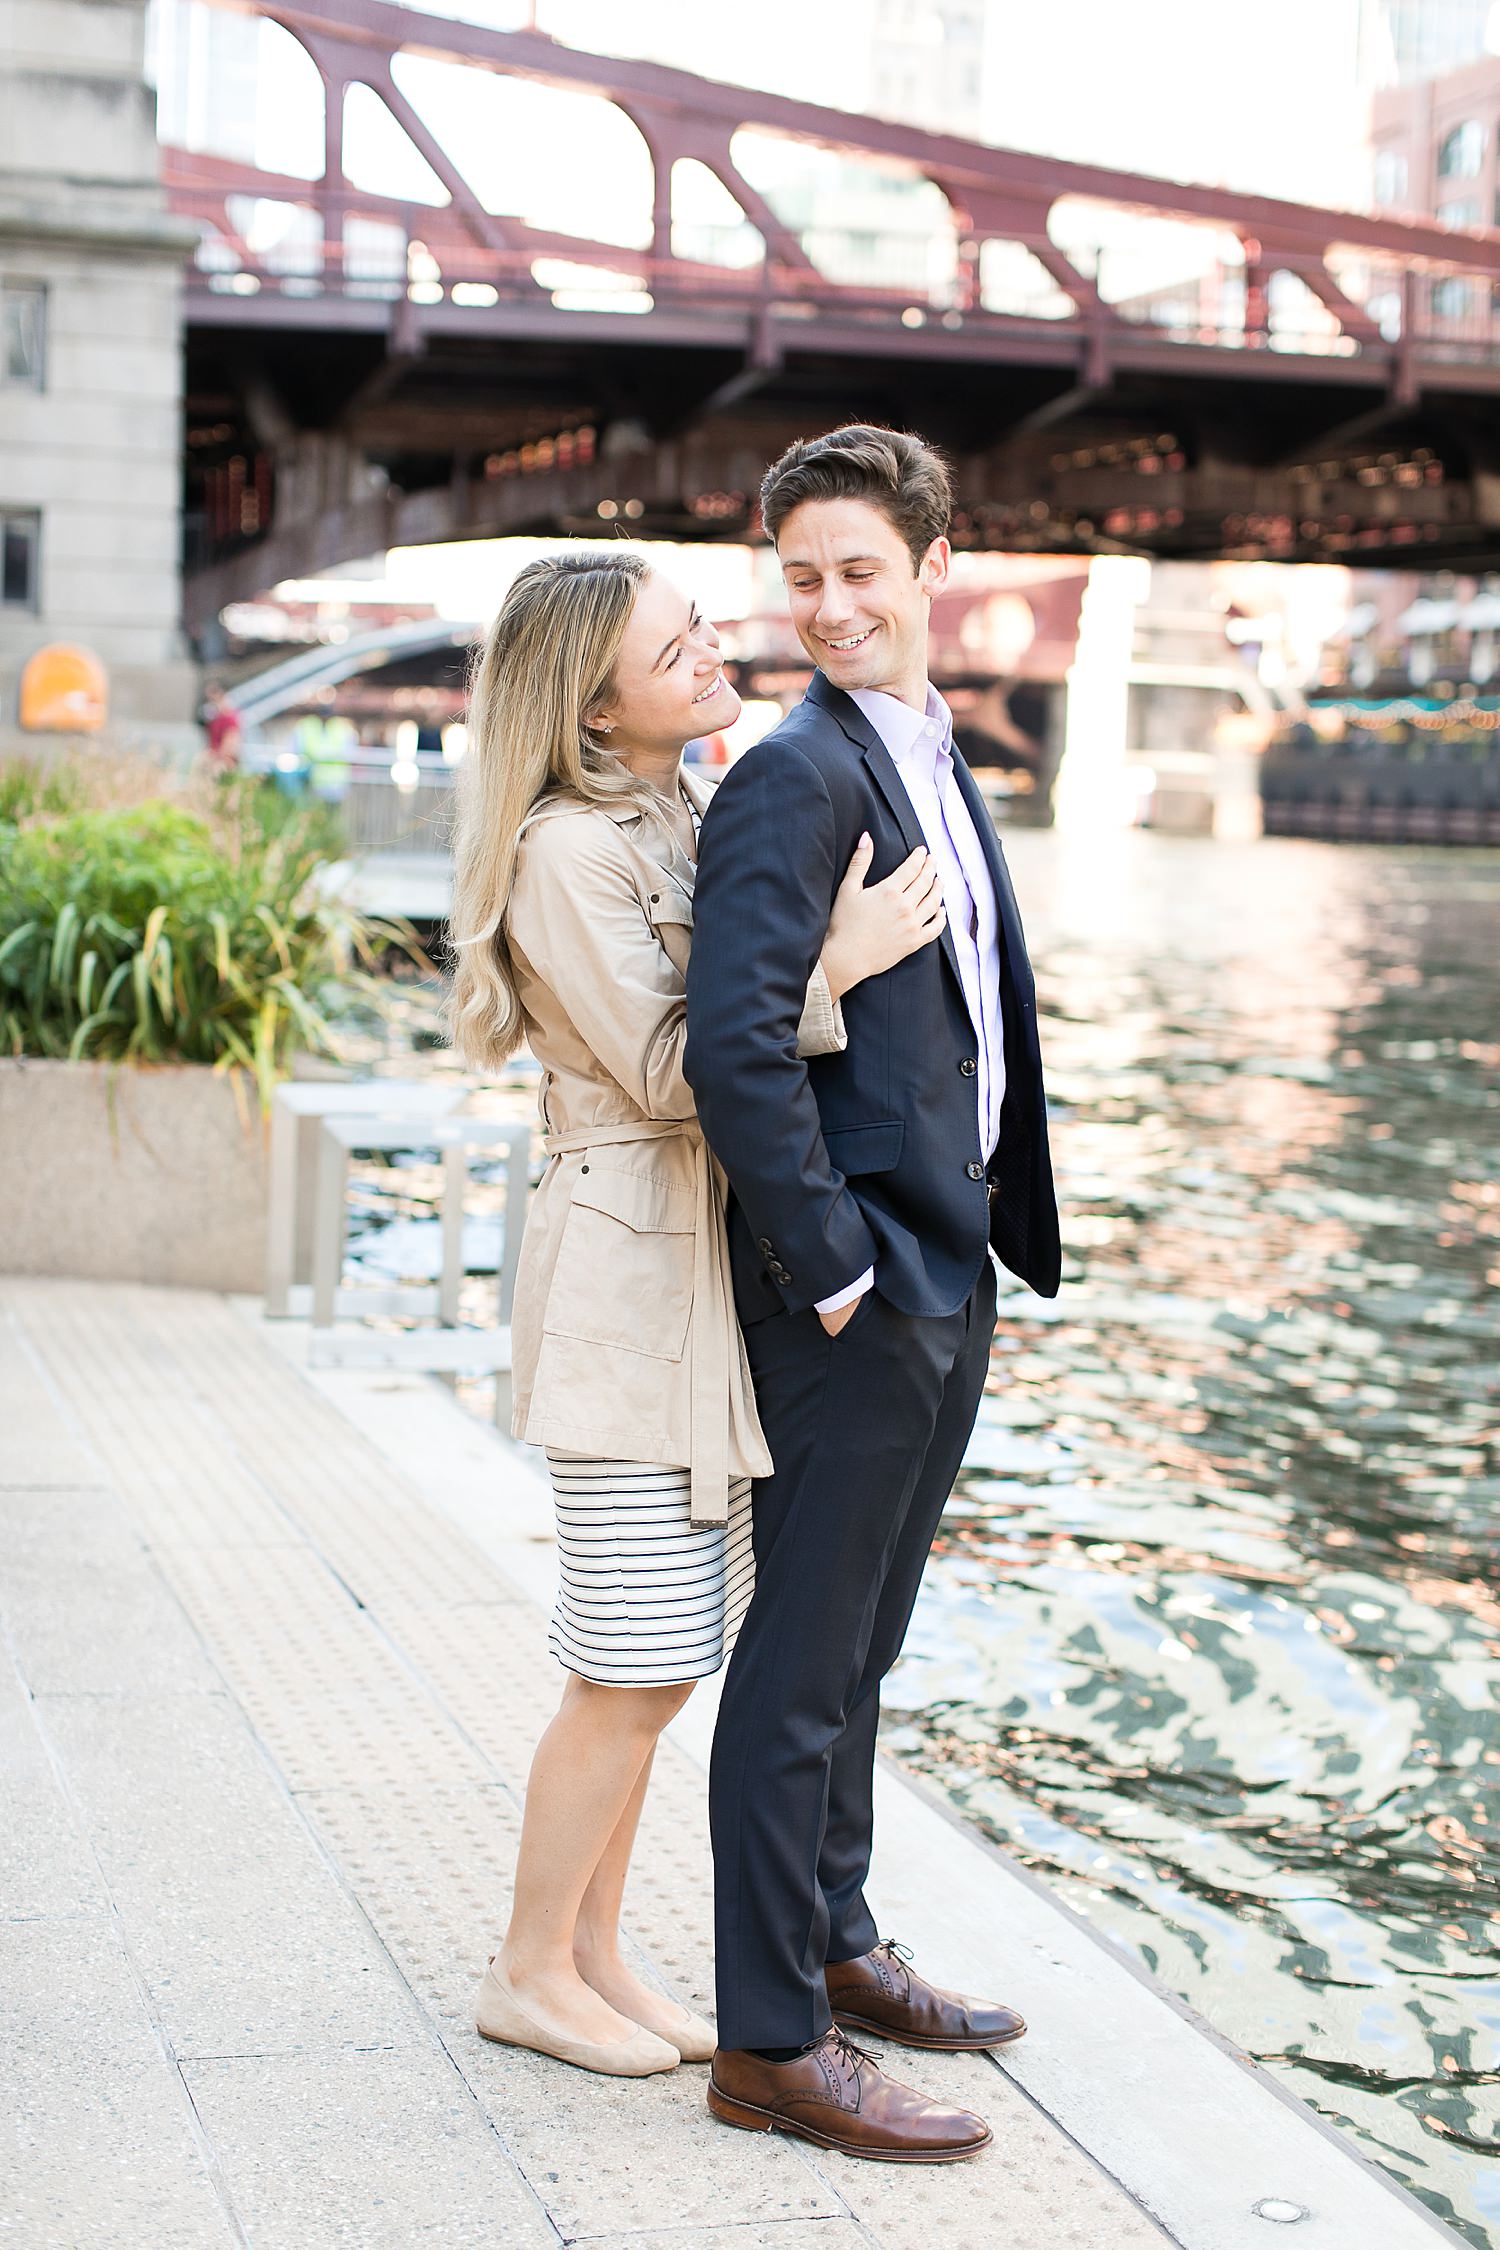 Evan and Julia take engagement photos by the Chicago Riverwalk.